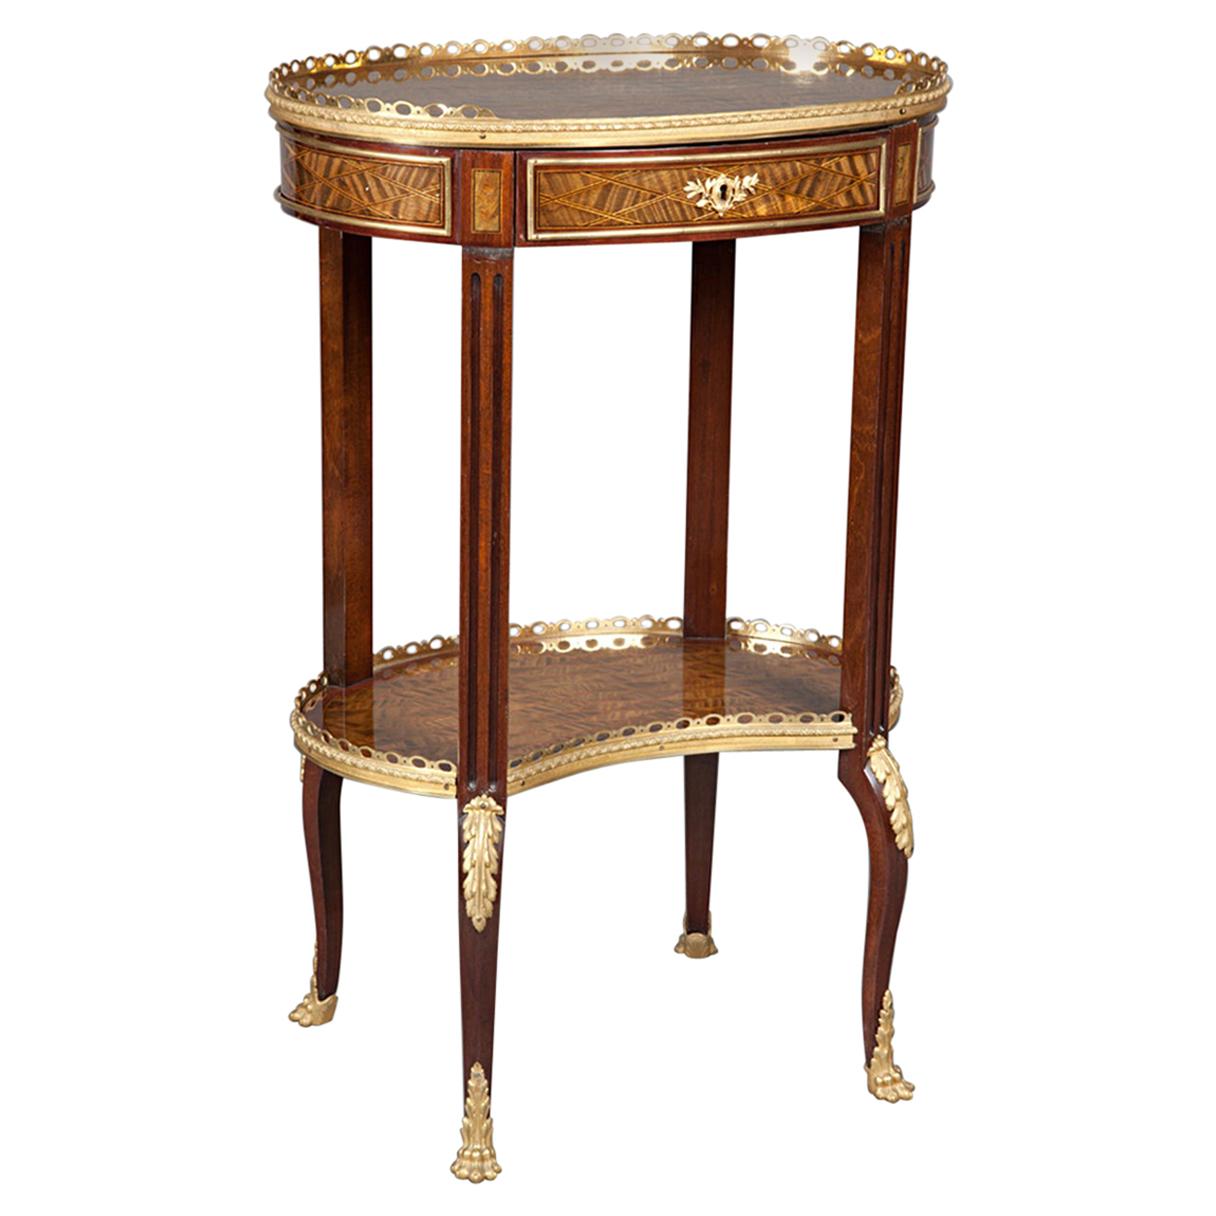 Louis XV-Style Ormolu-Mounted Inlaid Tulipwood and Mahogany Galleried Oval Table For Sale